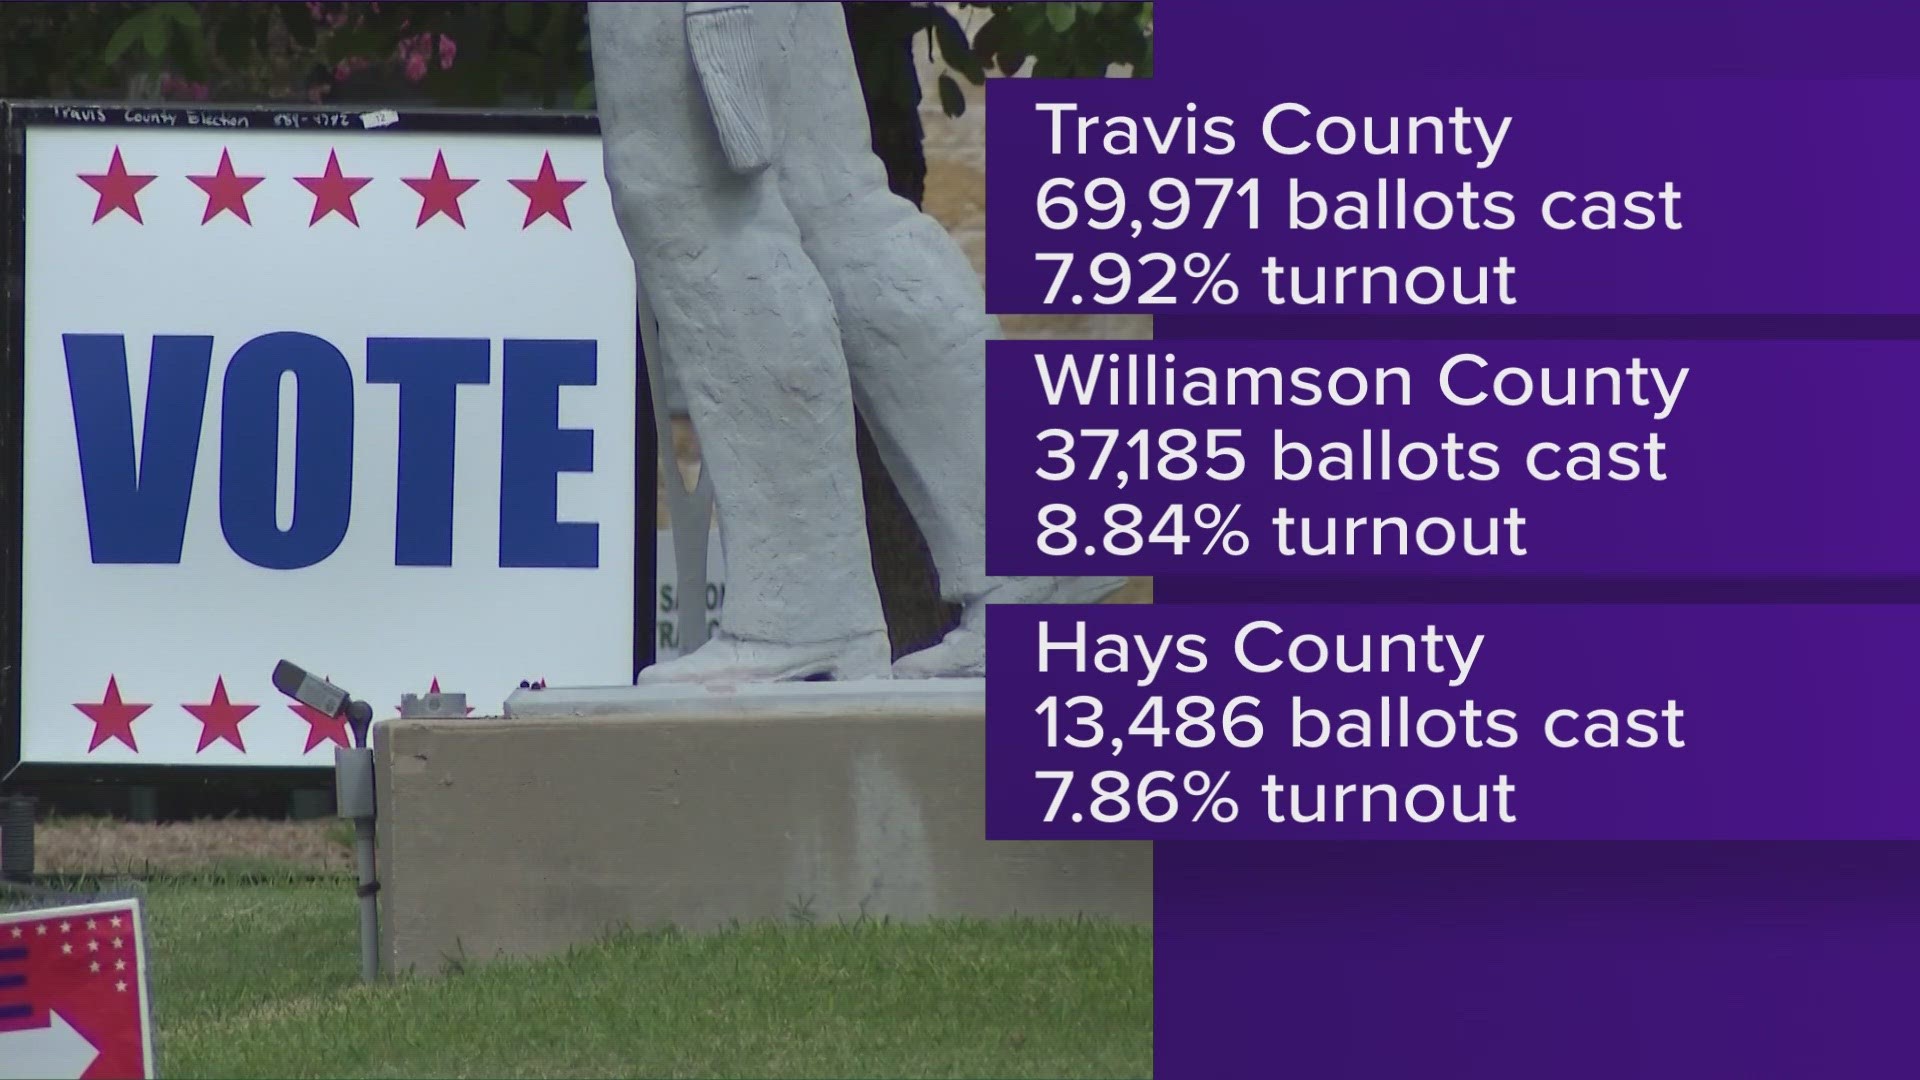 Leading up to Election Day, voter turnout has been low across the state.